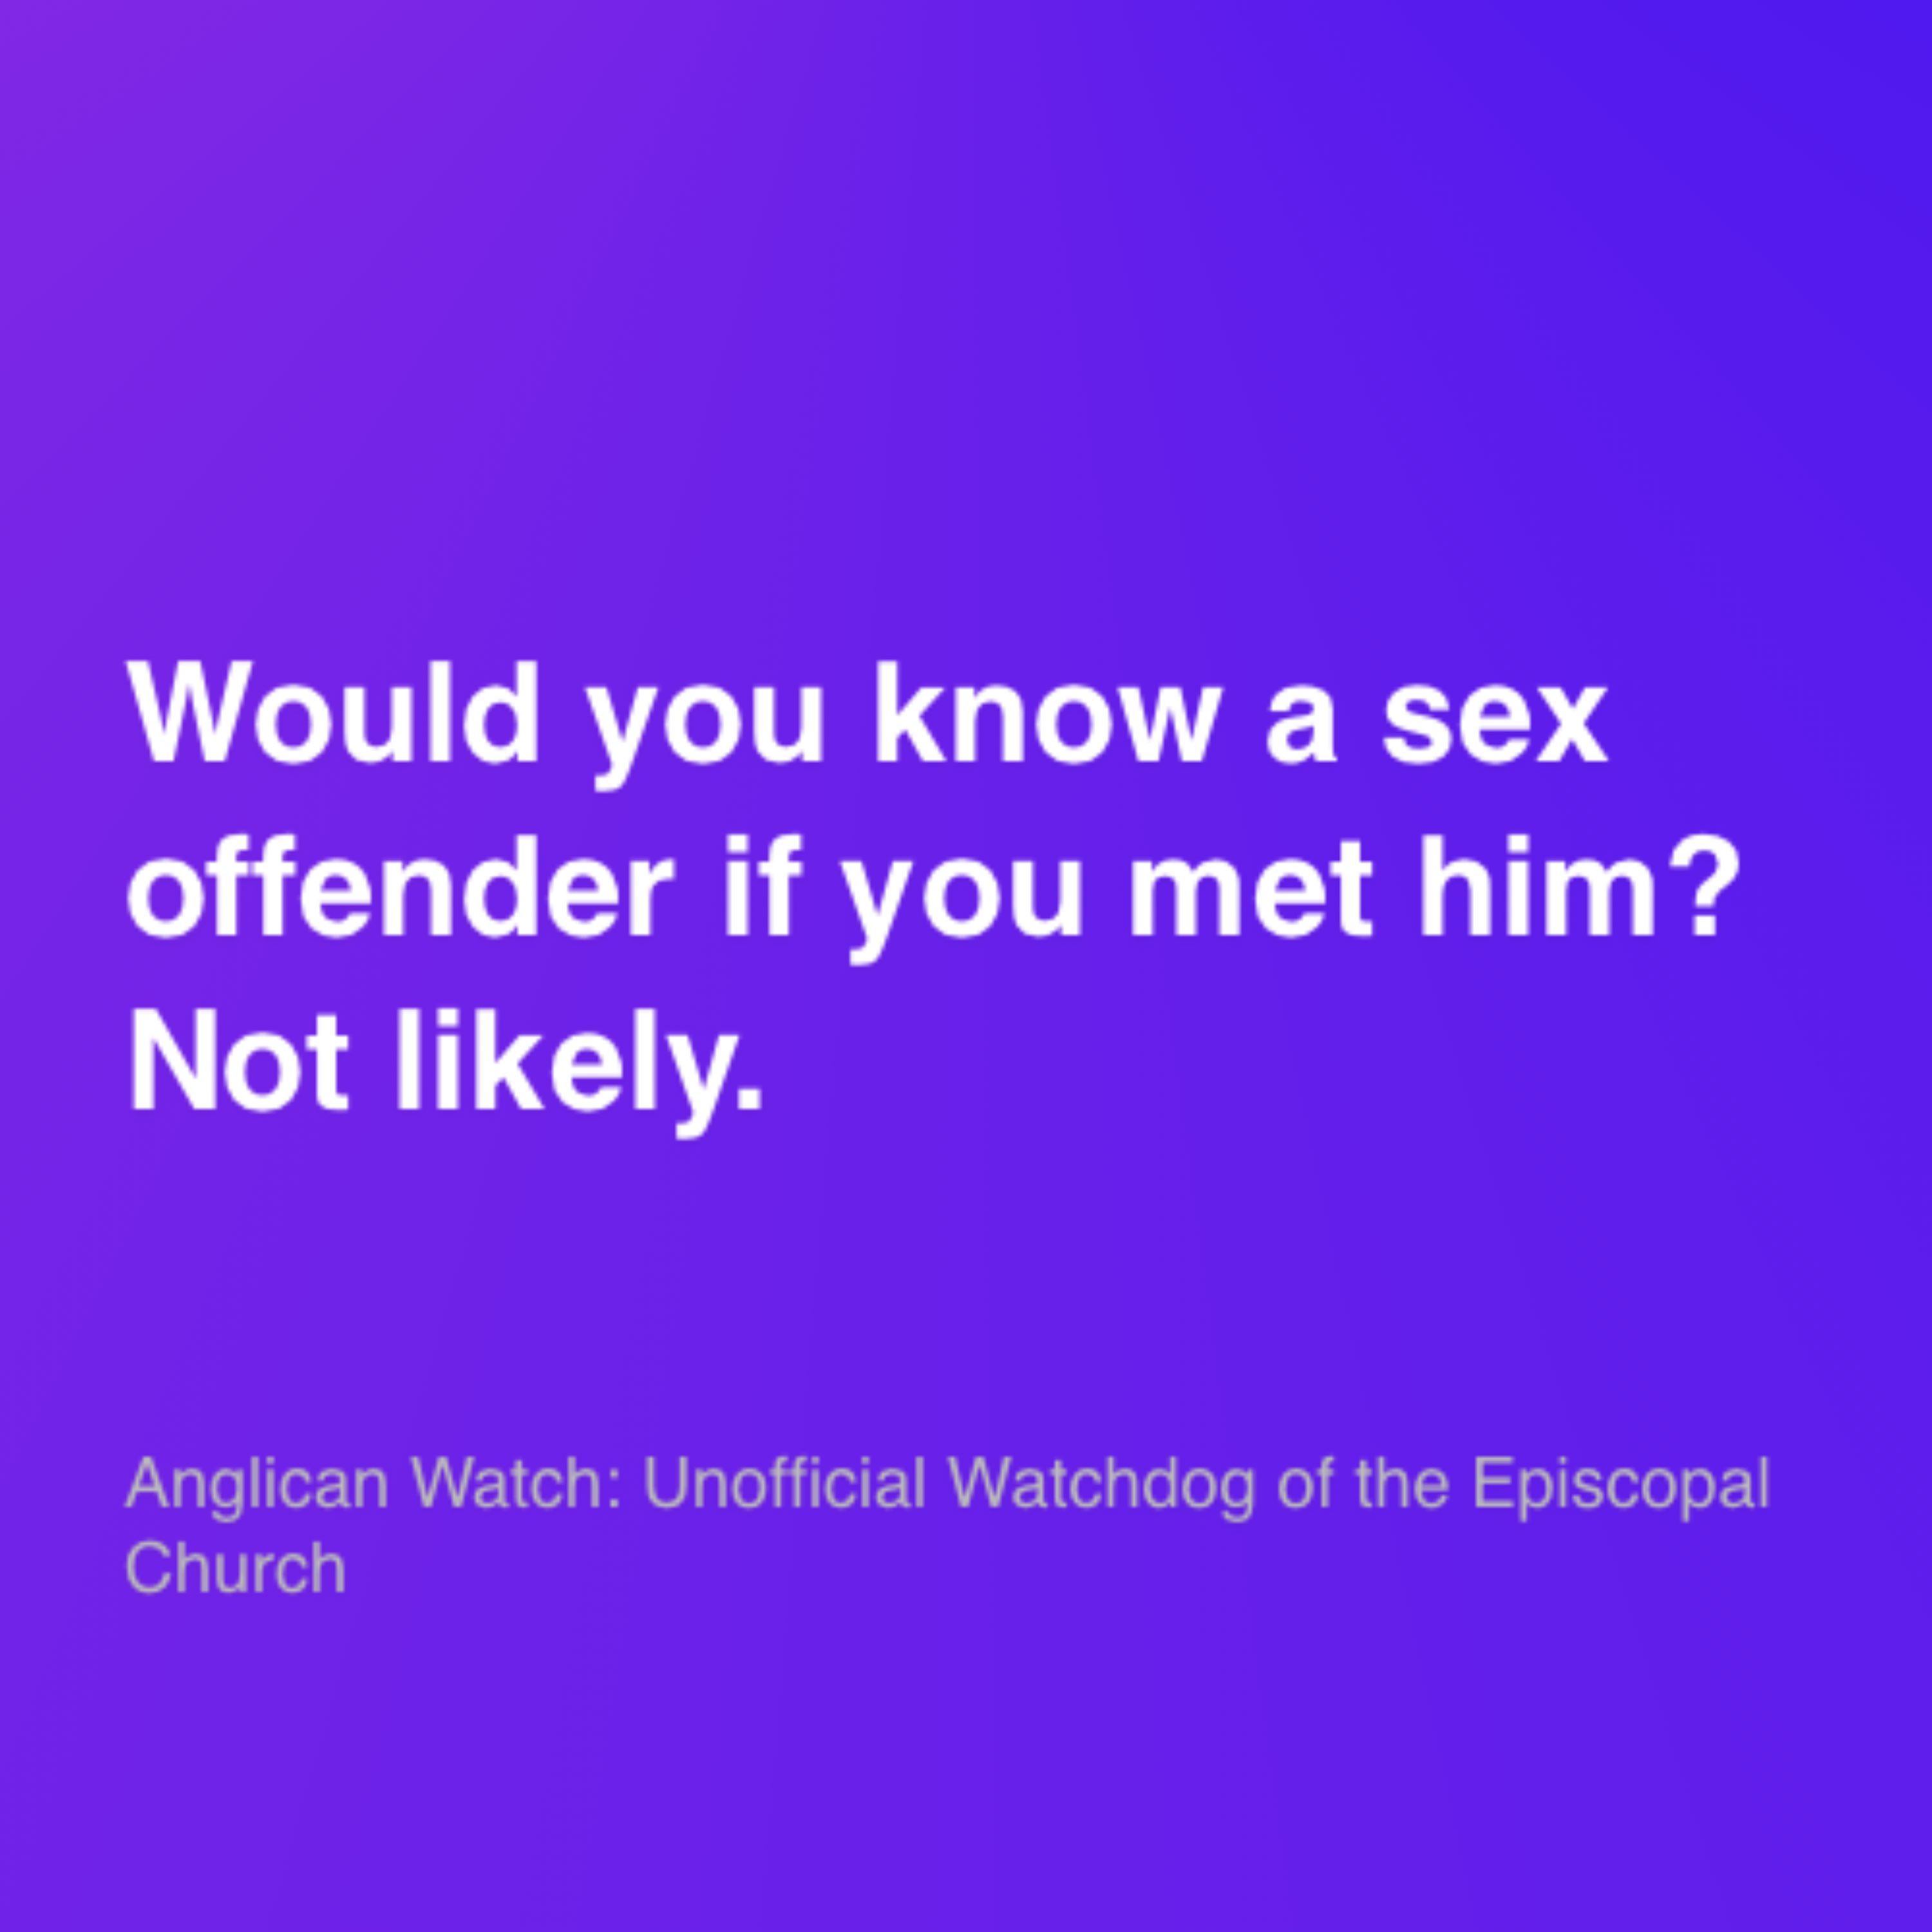 Would you know a sex offender if you met him? Not likely.